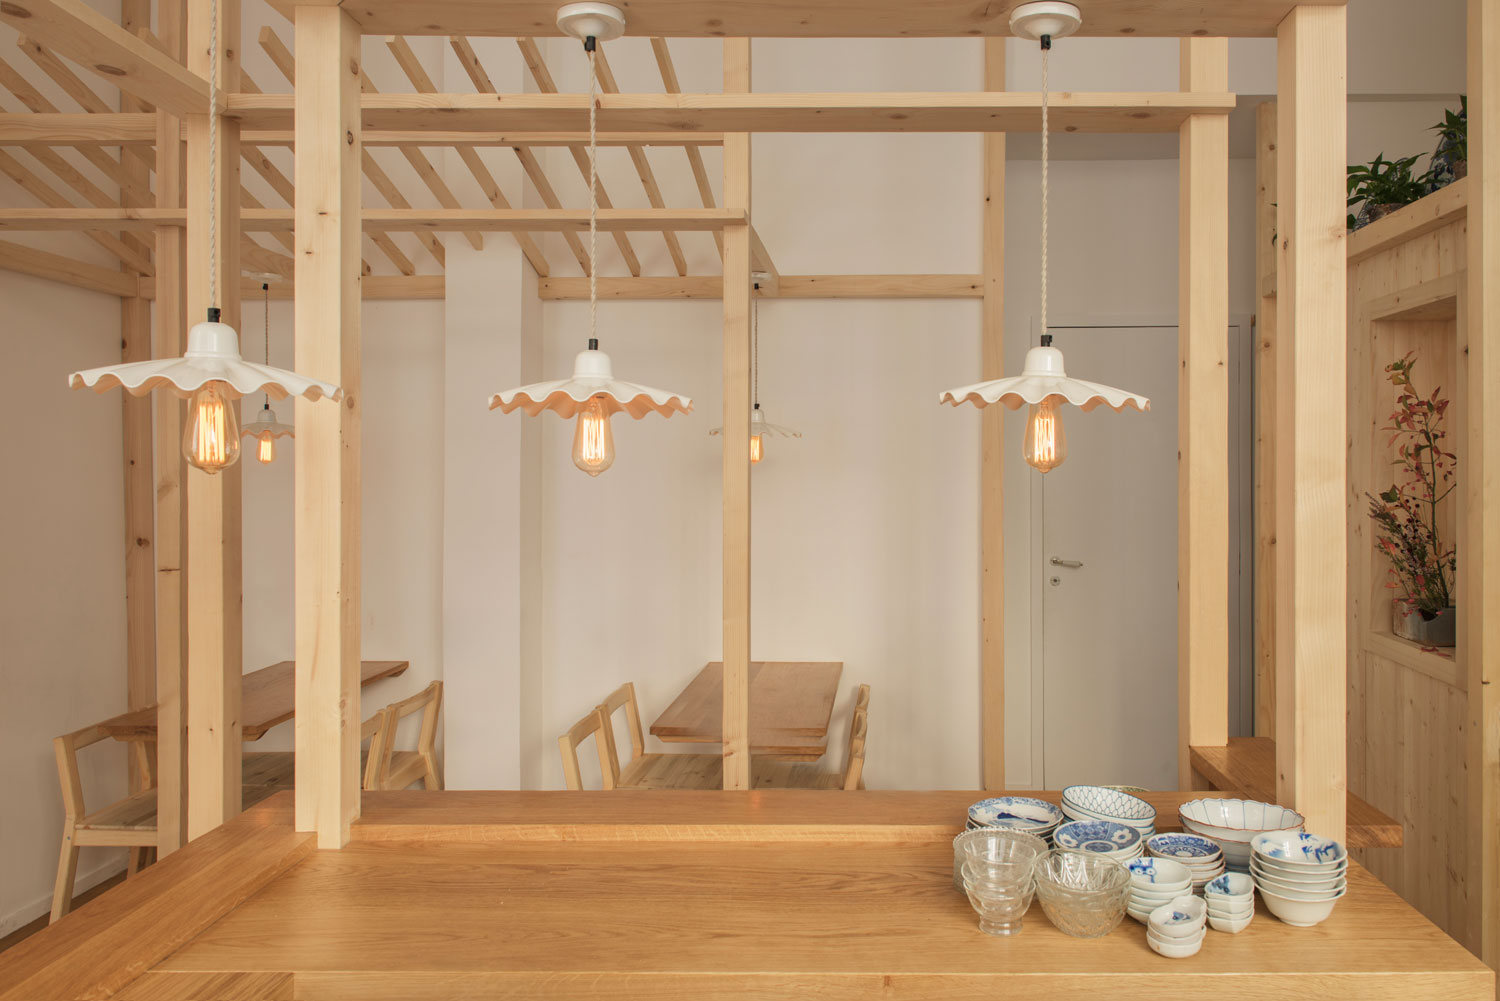 Our Ardle pendant lights enhance the authenticity of this Japanese restaurant